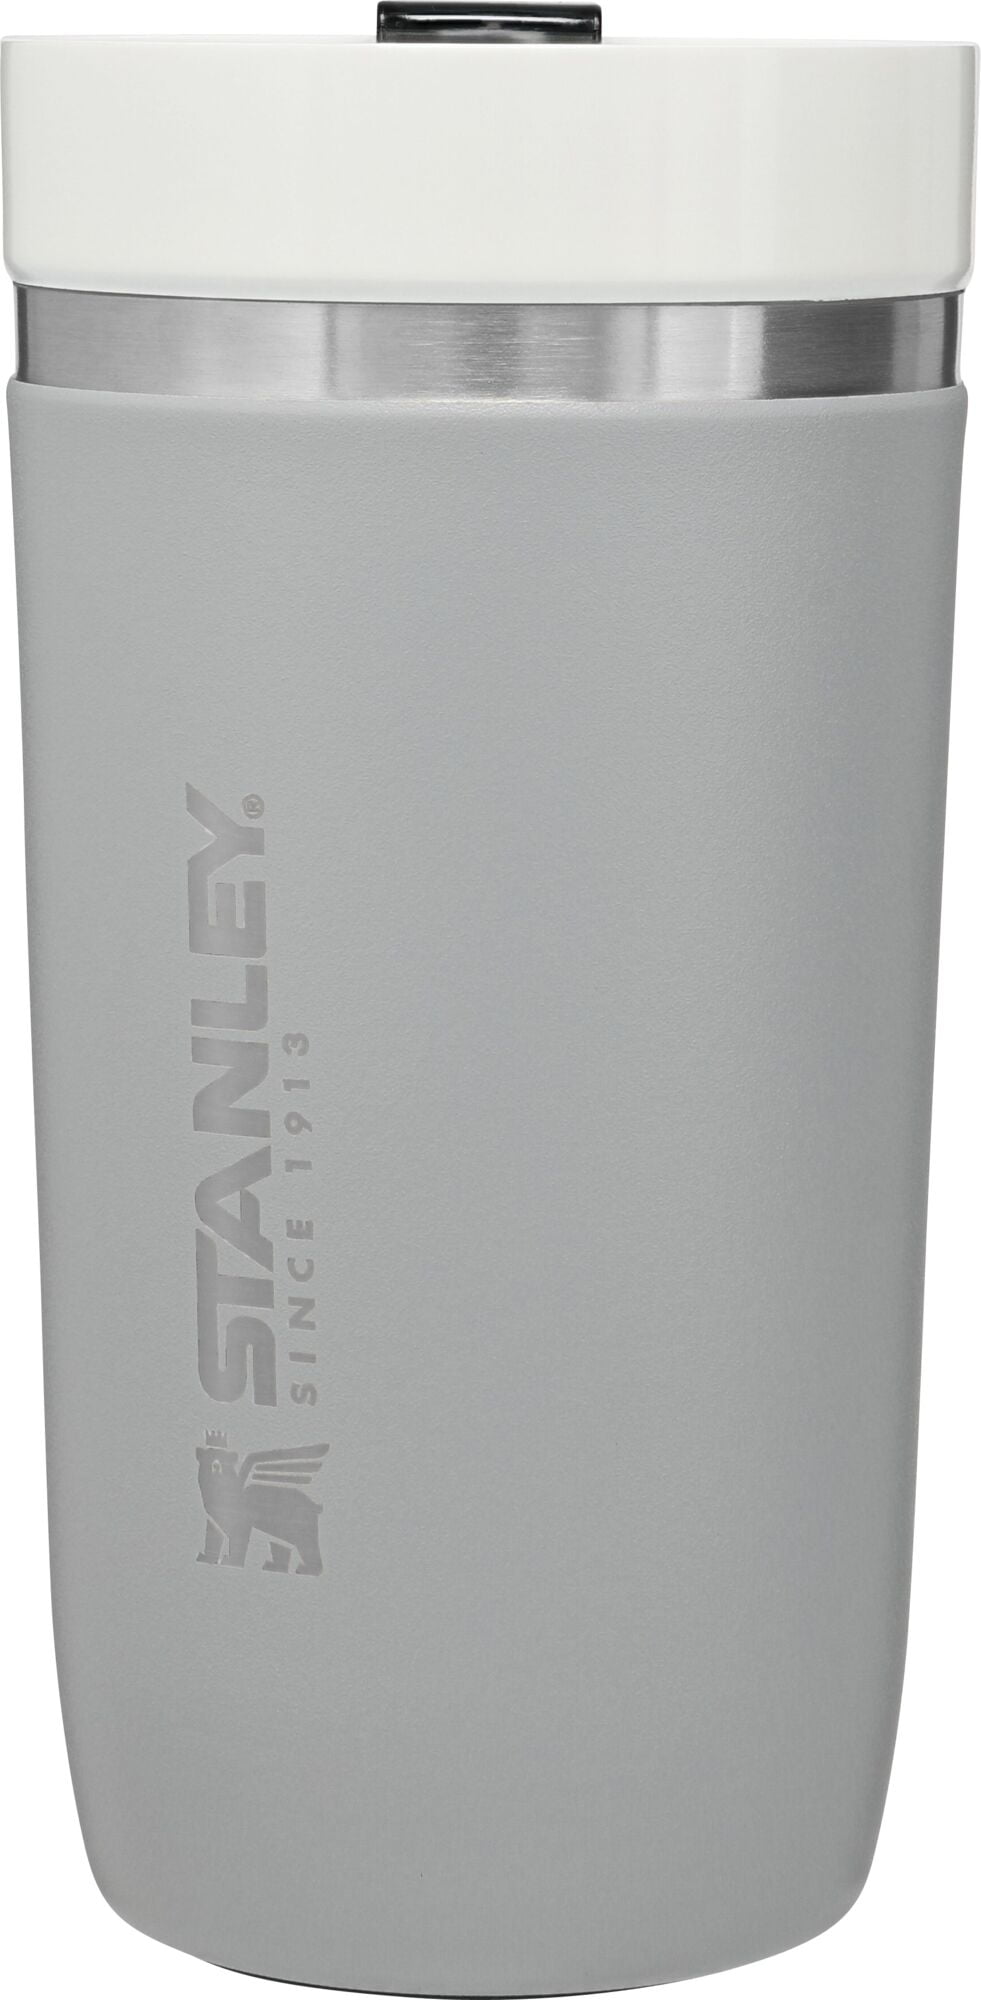 Stanley GO Vacuum Insulated Tumbler Stainless Steel 14 oz. – Chris Sports